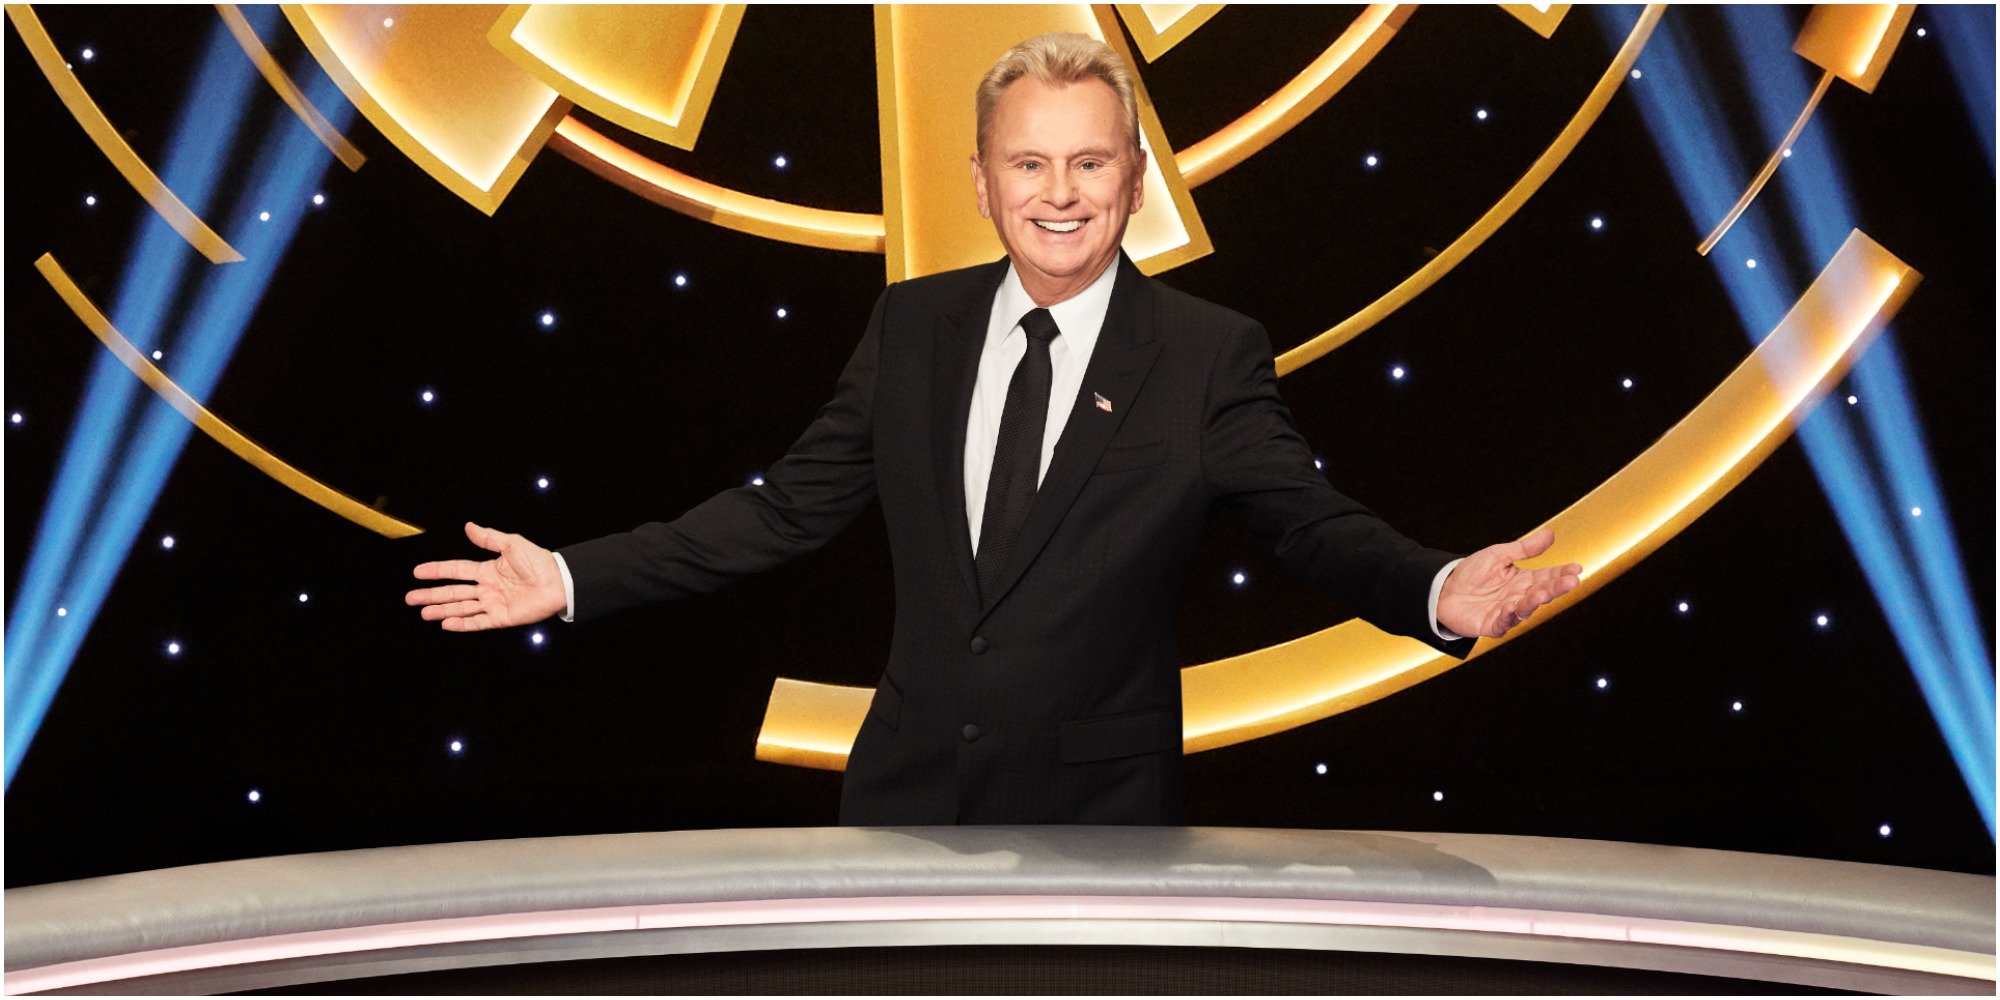 Pat Sajak announced a major change to "Wheel of Fortune."